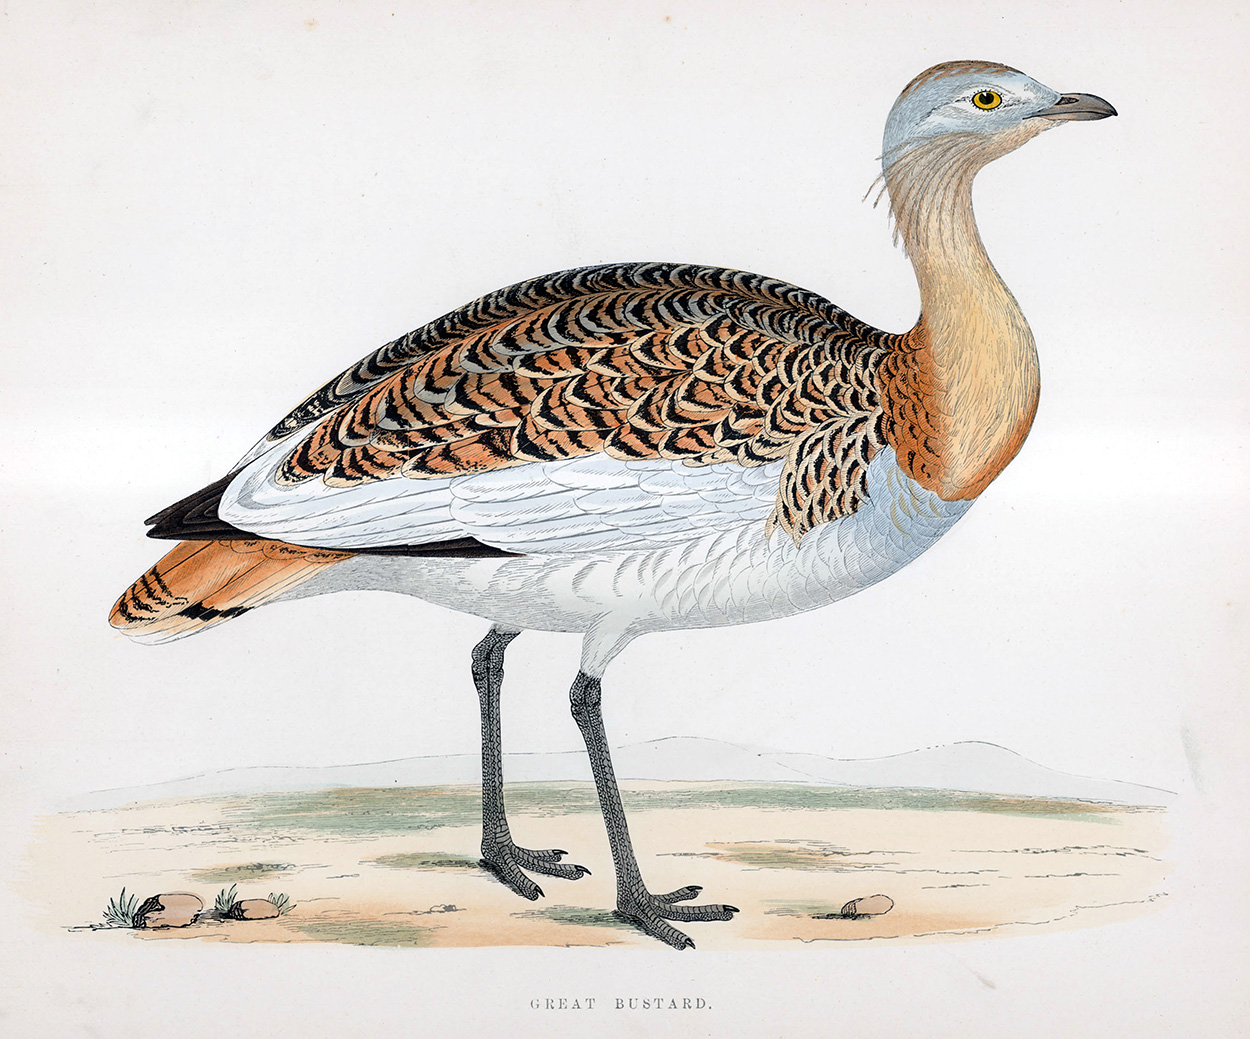 Great Bustard - hand coloured lithograph 1891 (Print) art by Beverley R Morris Art at The Illustration Art Gallery